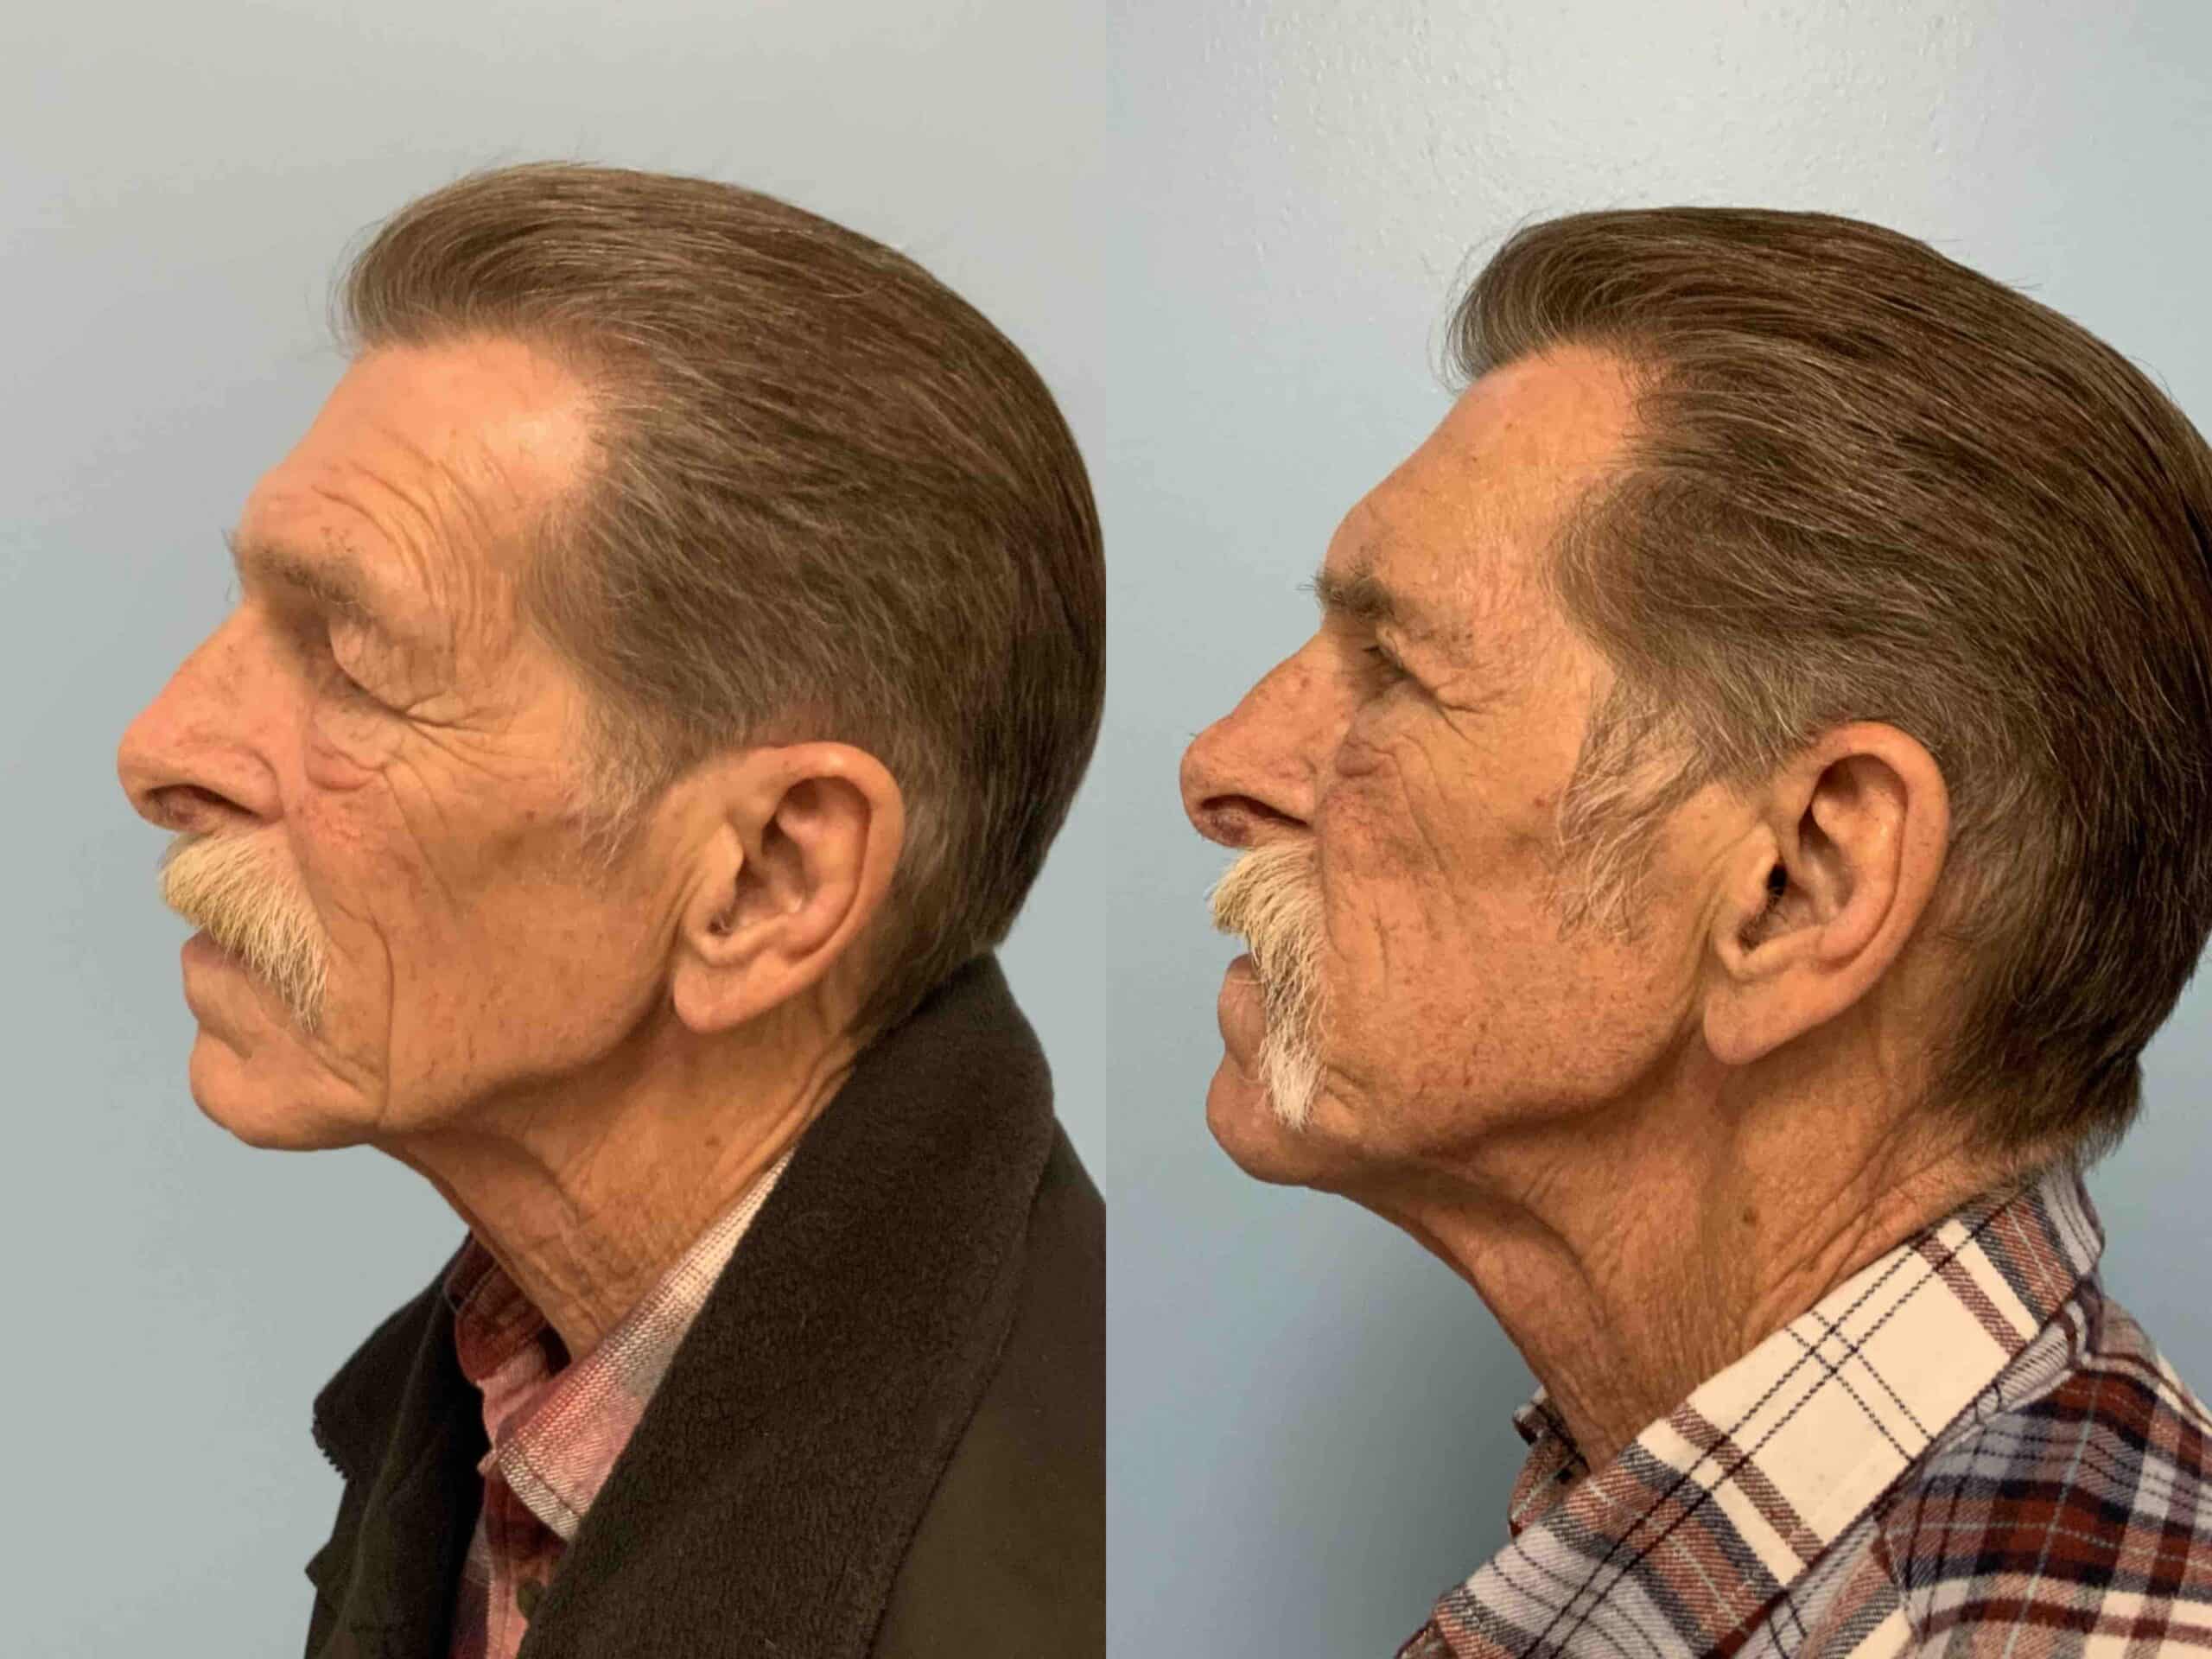 Before and after, 1 mo post op from upper blepharoplasty performed by Dr. Paul Vanek (side view)